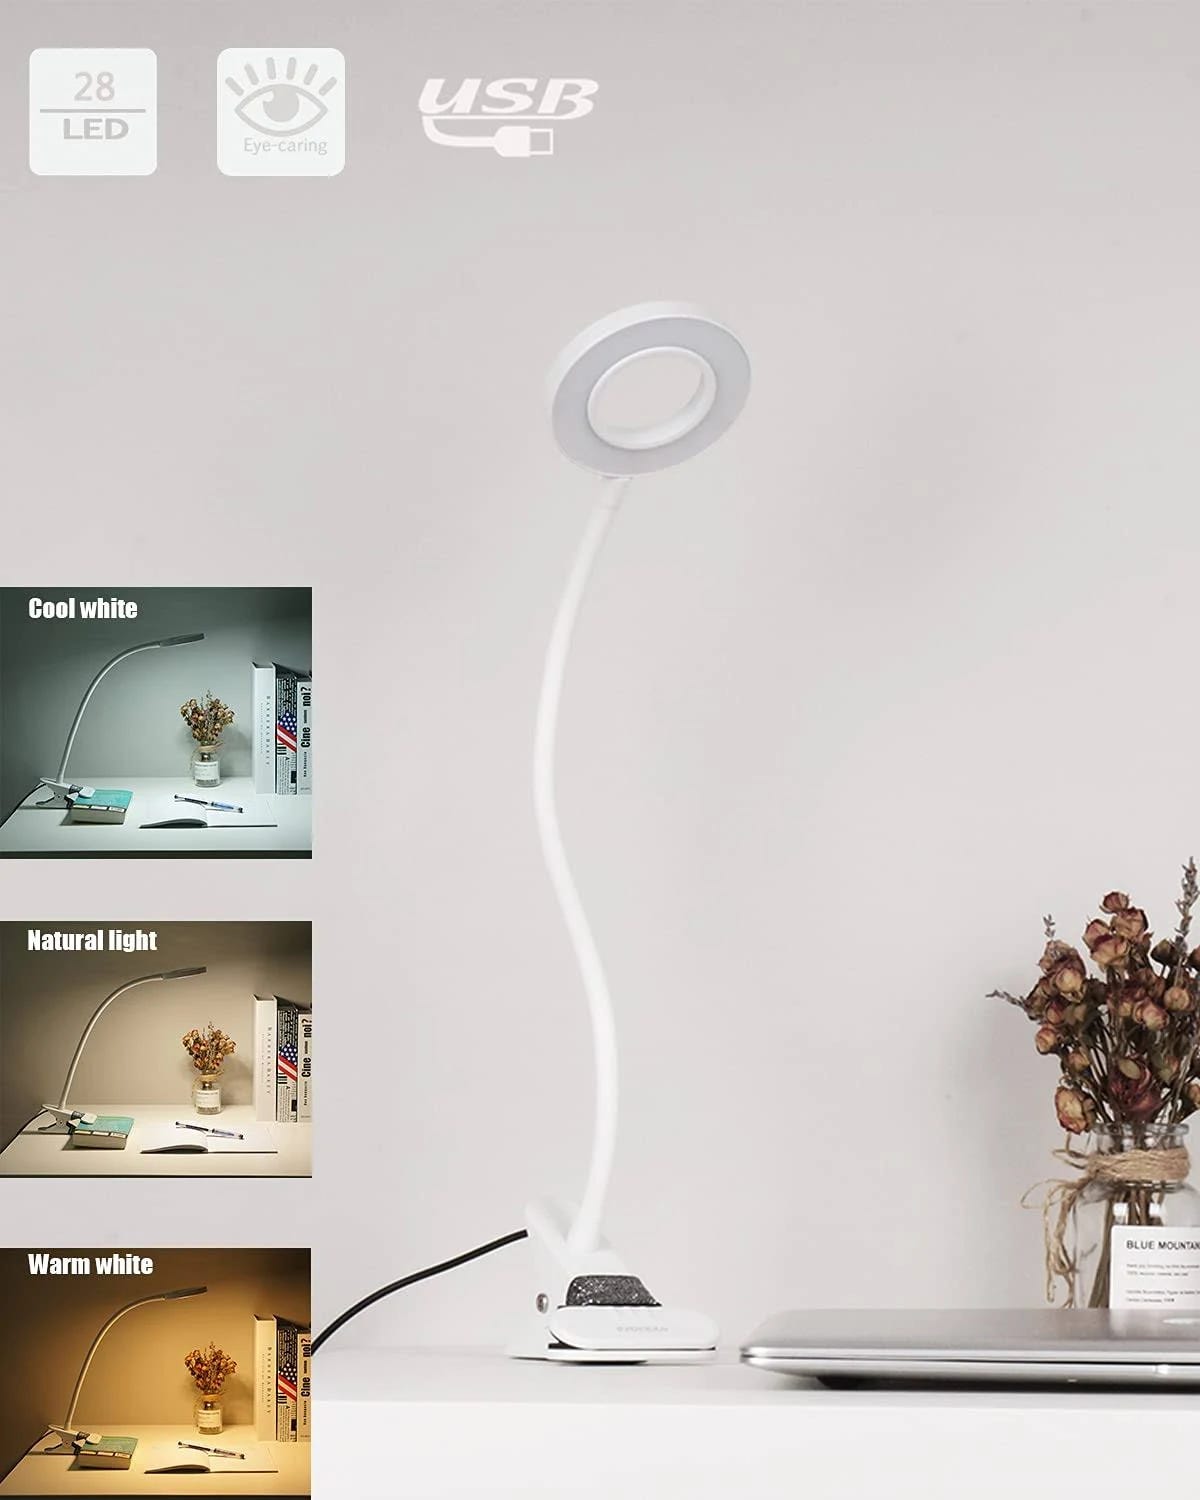 Stylish Eye-Care LED Clip-on Light for Safe and Comfortable Reading | Image